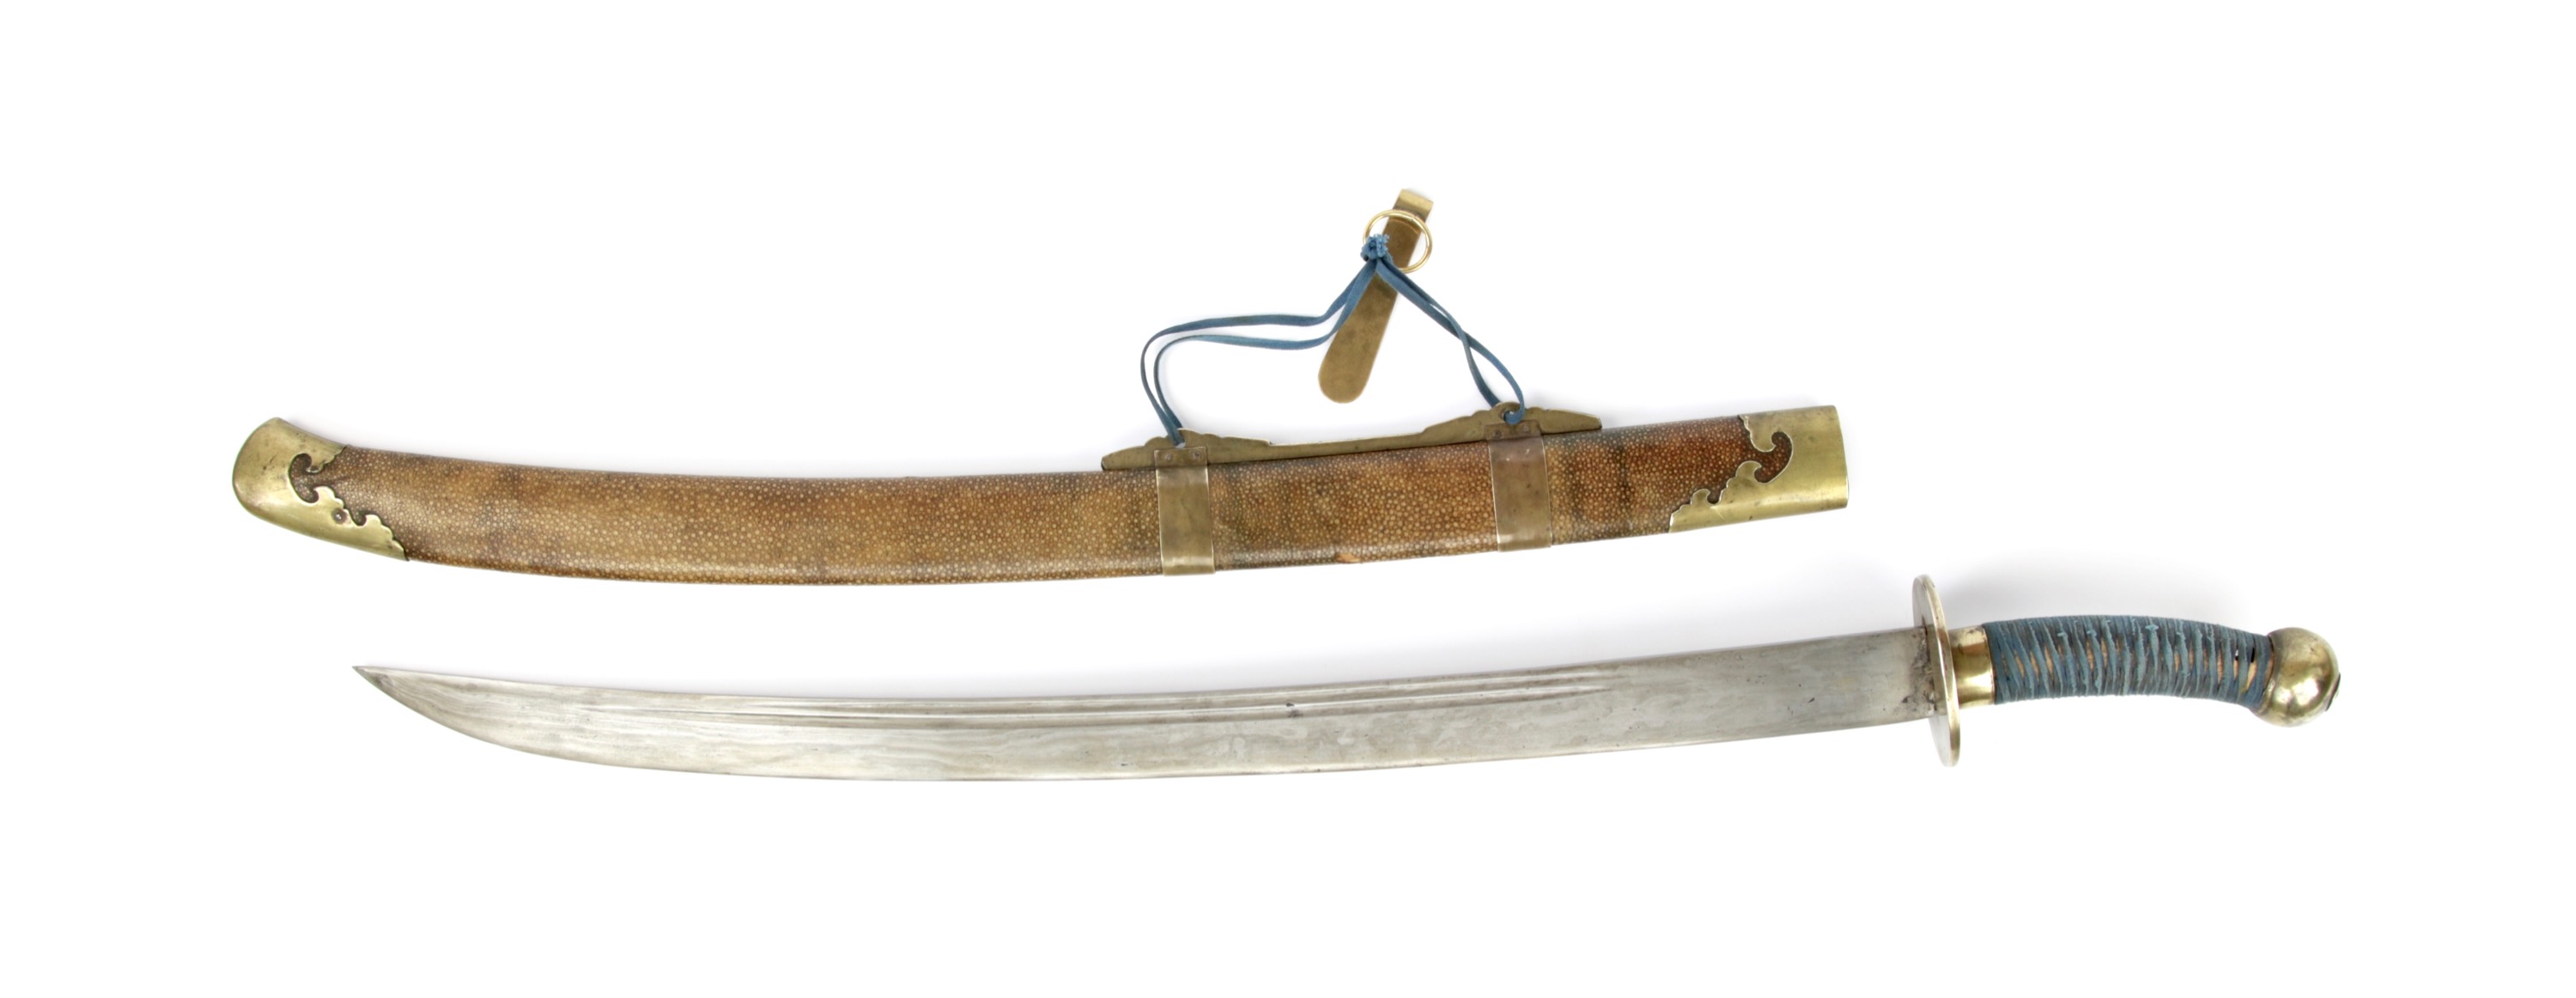 19th century Qing military saber